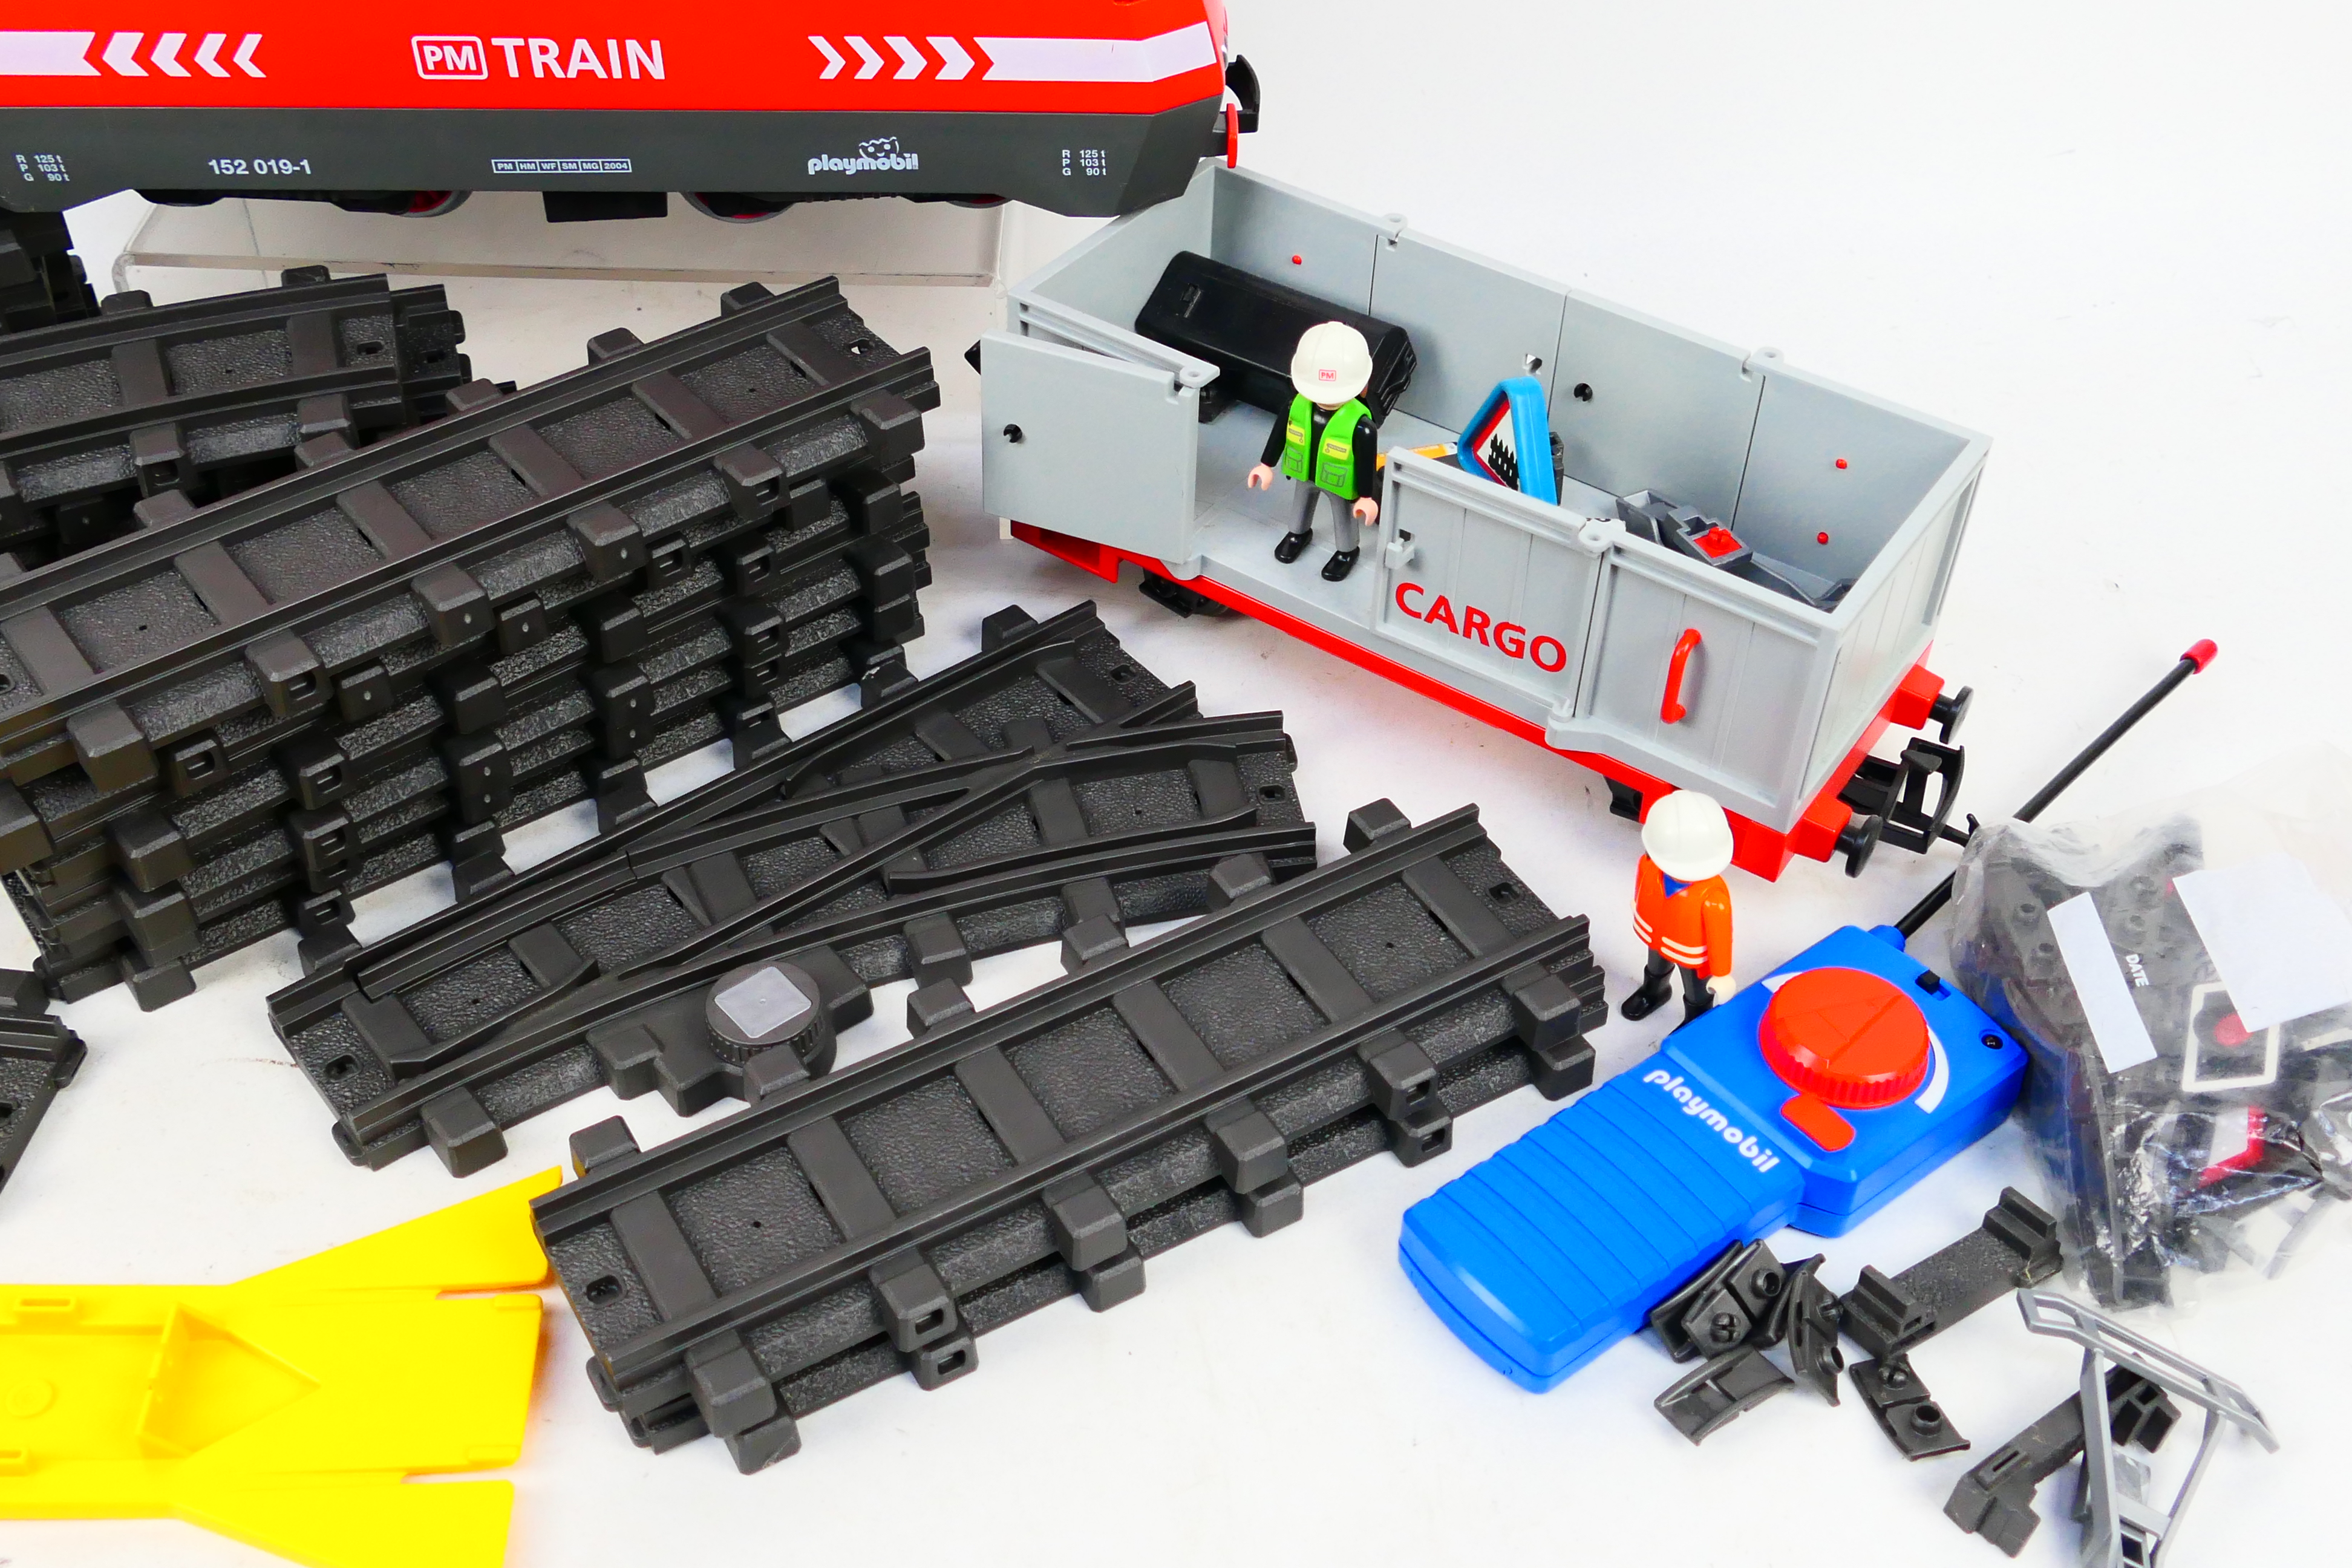 Playmobil - An unboxed Plymobil #4010 remote control Cargo Train Set. - Image 5 of 5